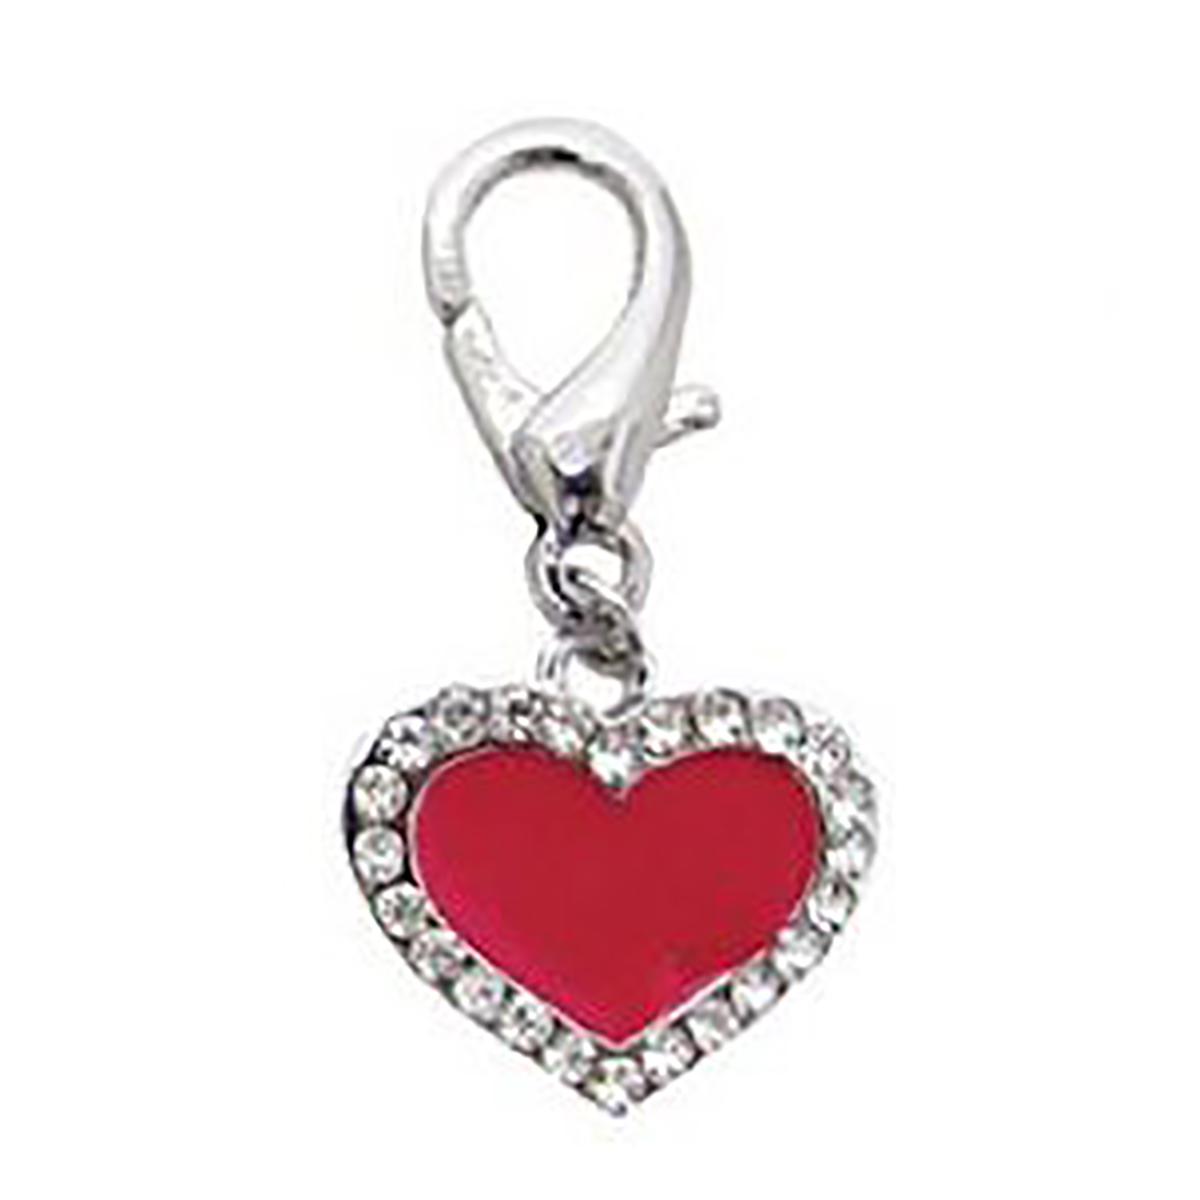 Enamel Heart D-Ring Pet Collar Charm by FouFou Dog - Red